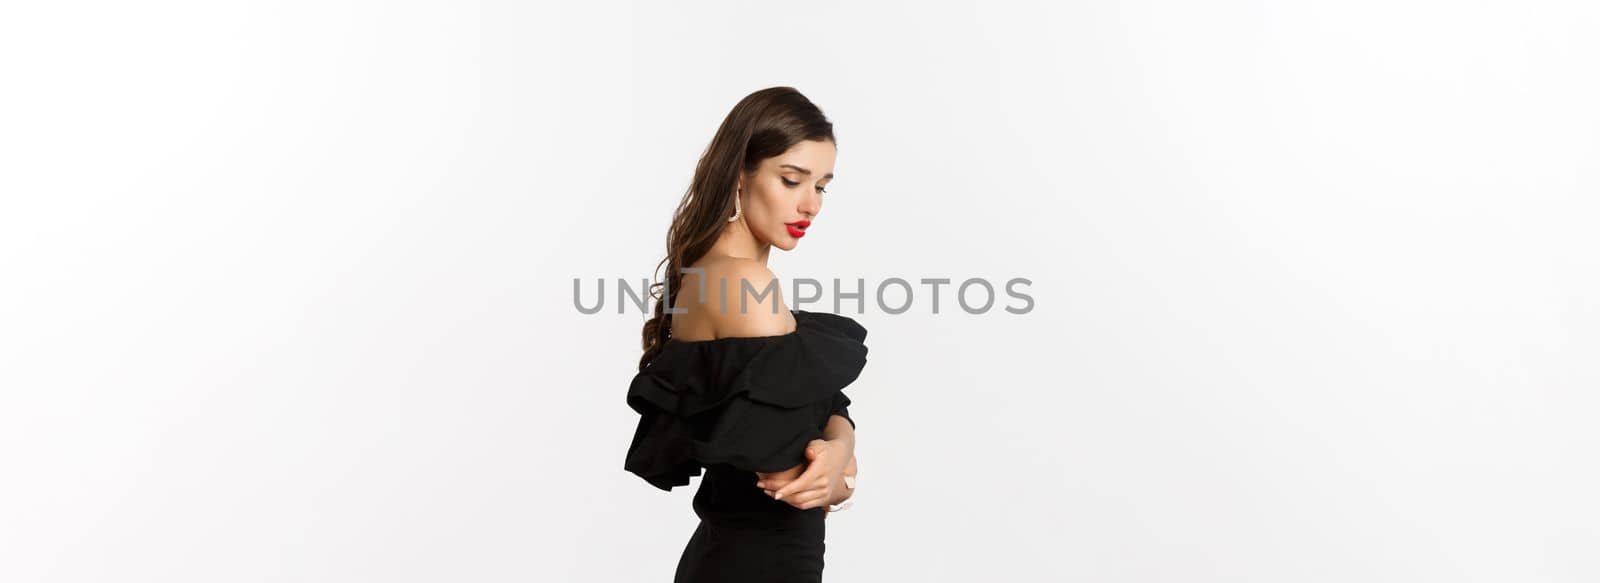 Profile of sensual brunette woman in black elegant dress, looking down, standing over white background.